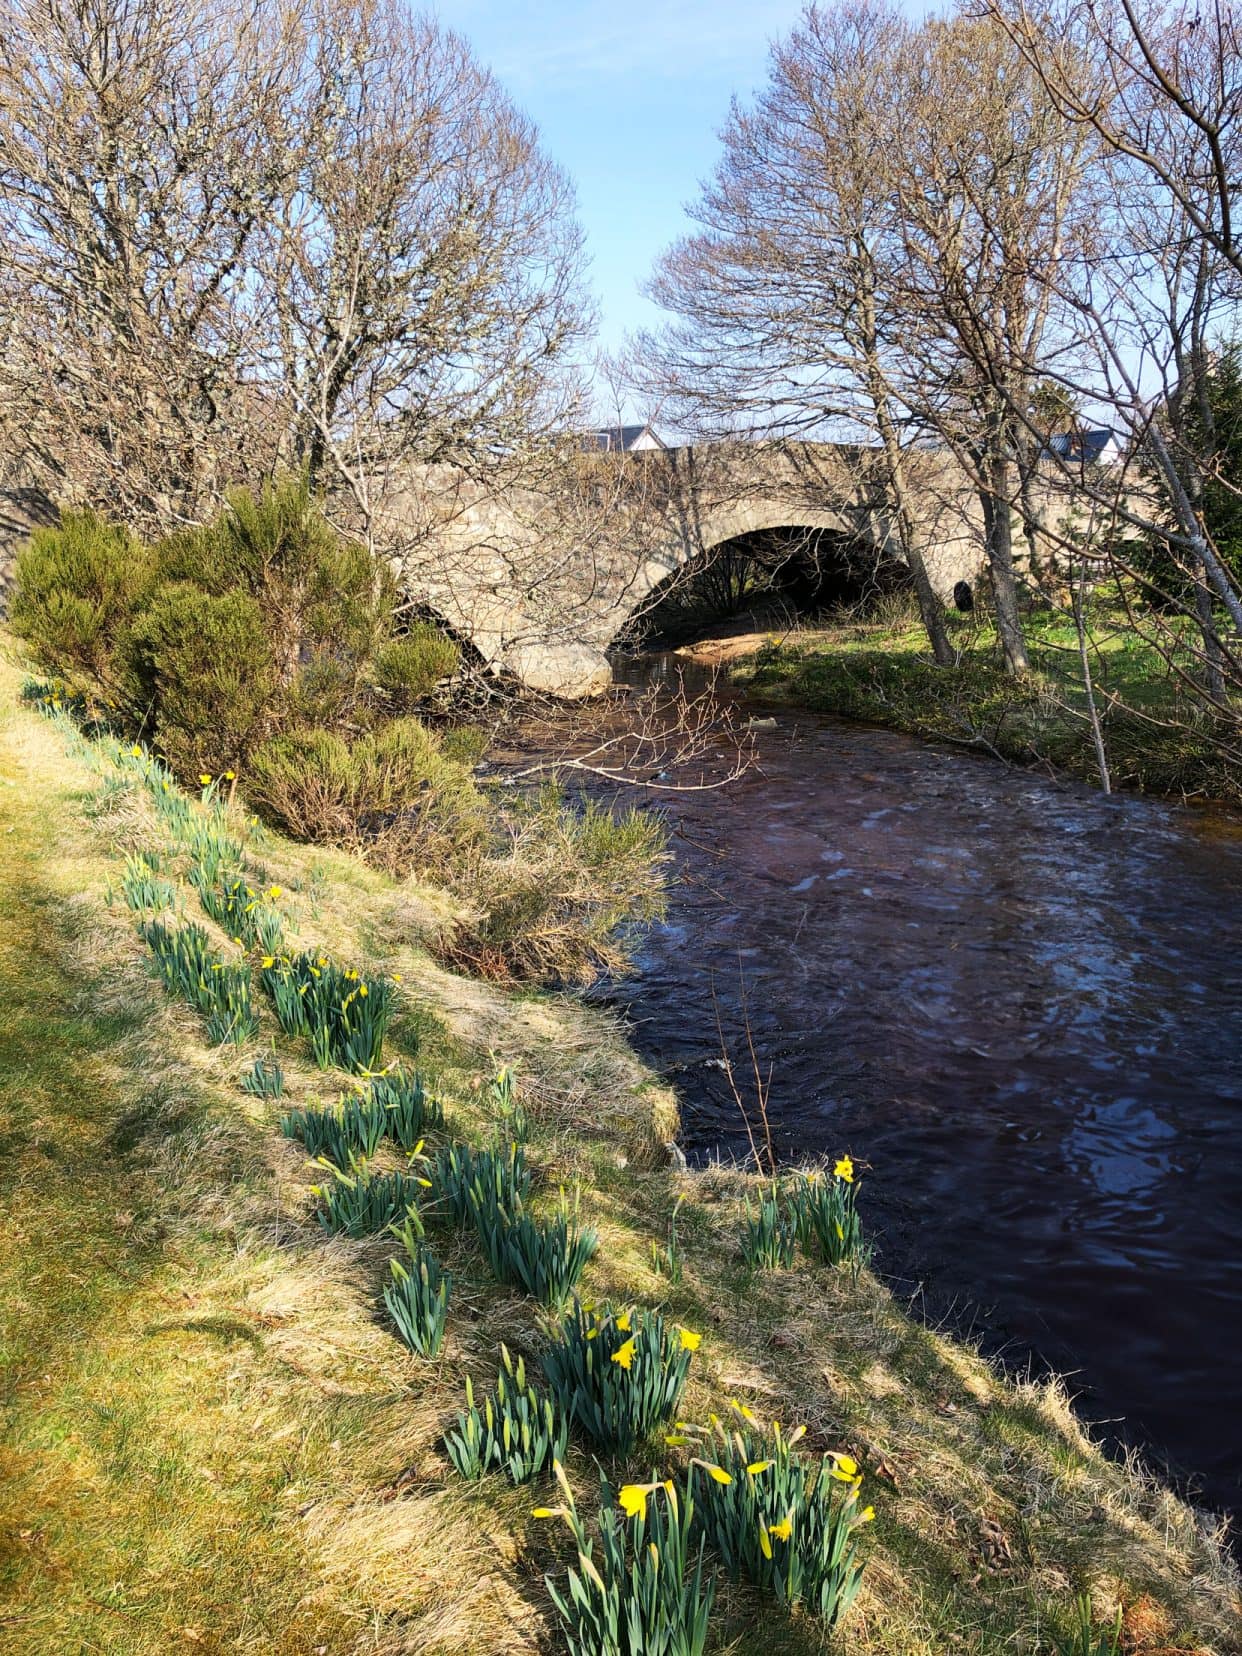 Stone arced bridge over a river with the riverbank full of daffodils